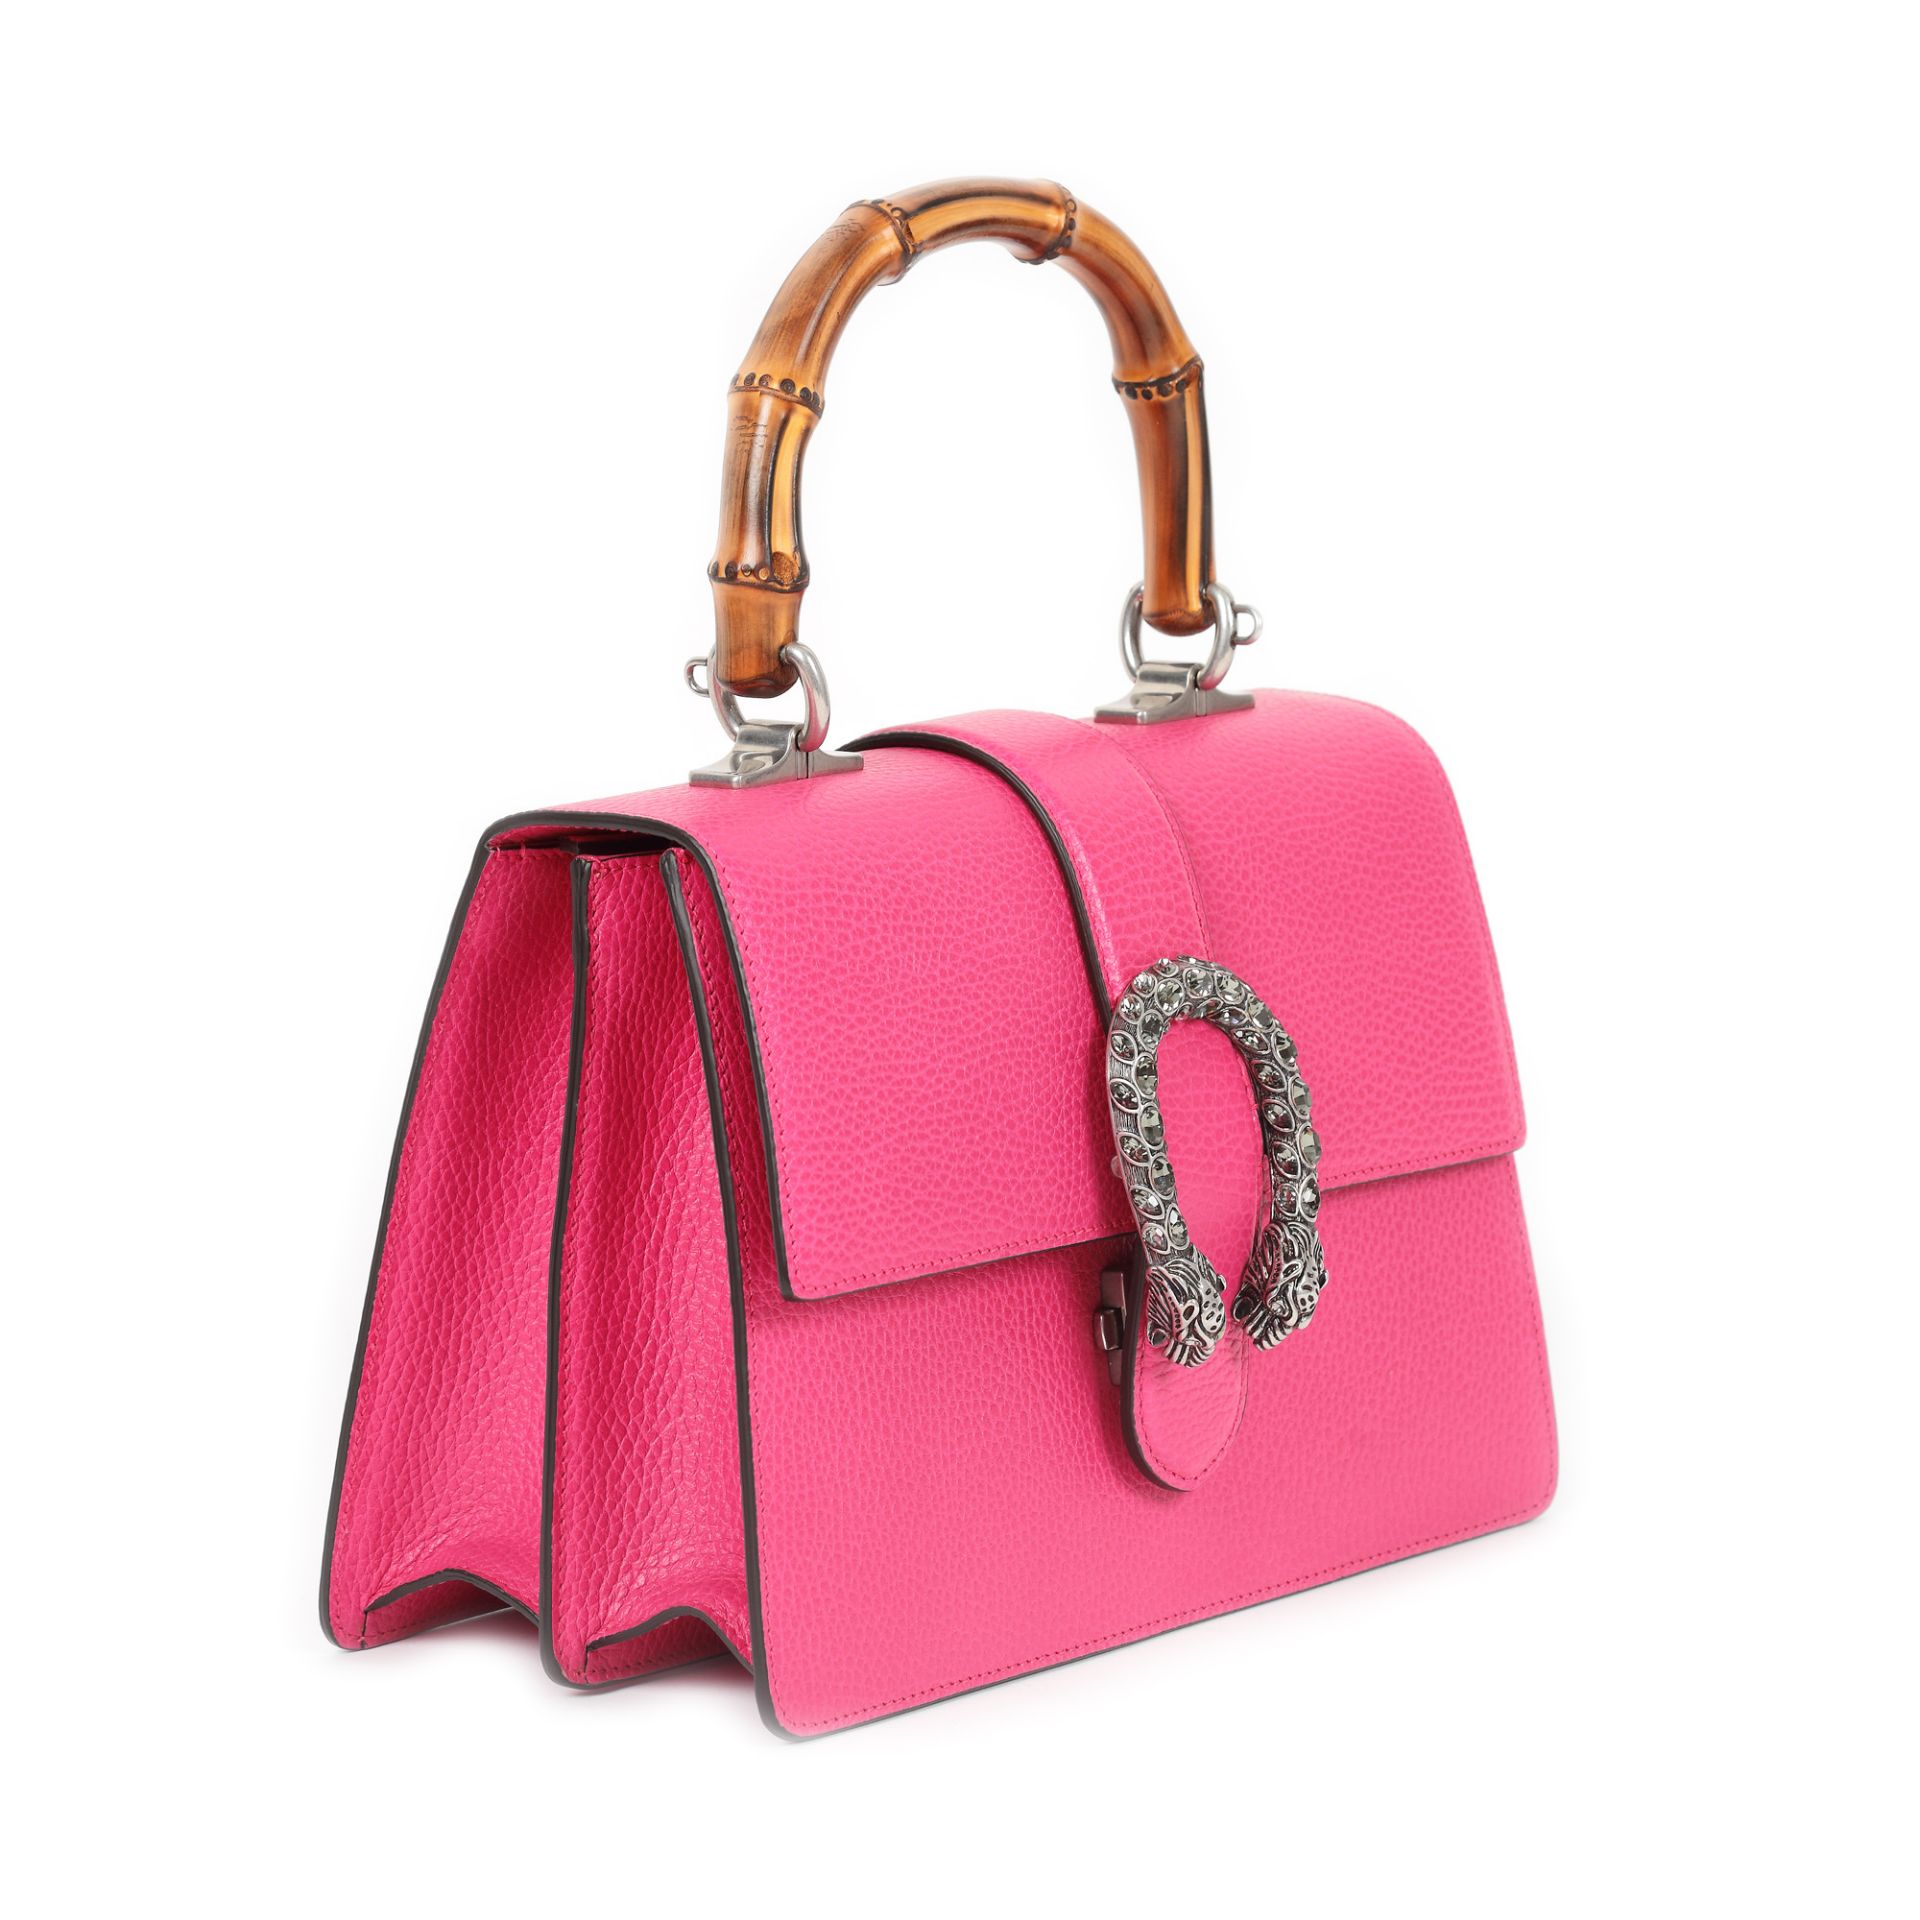 "Dionysus" - Gucci bag, leather, pink, decorated with bamboo handle - Image 2 of 5